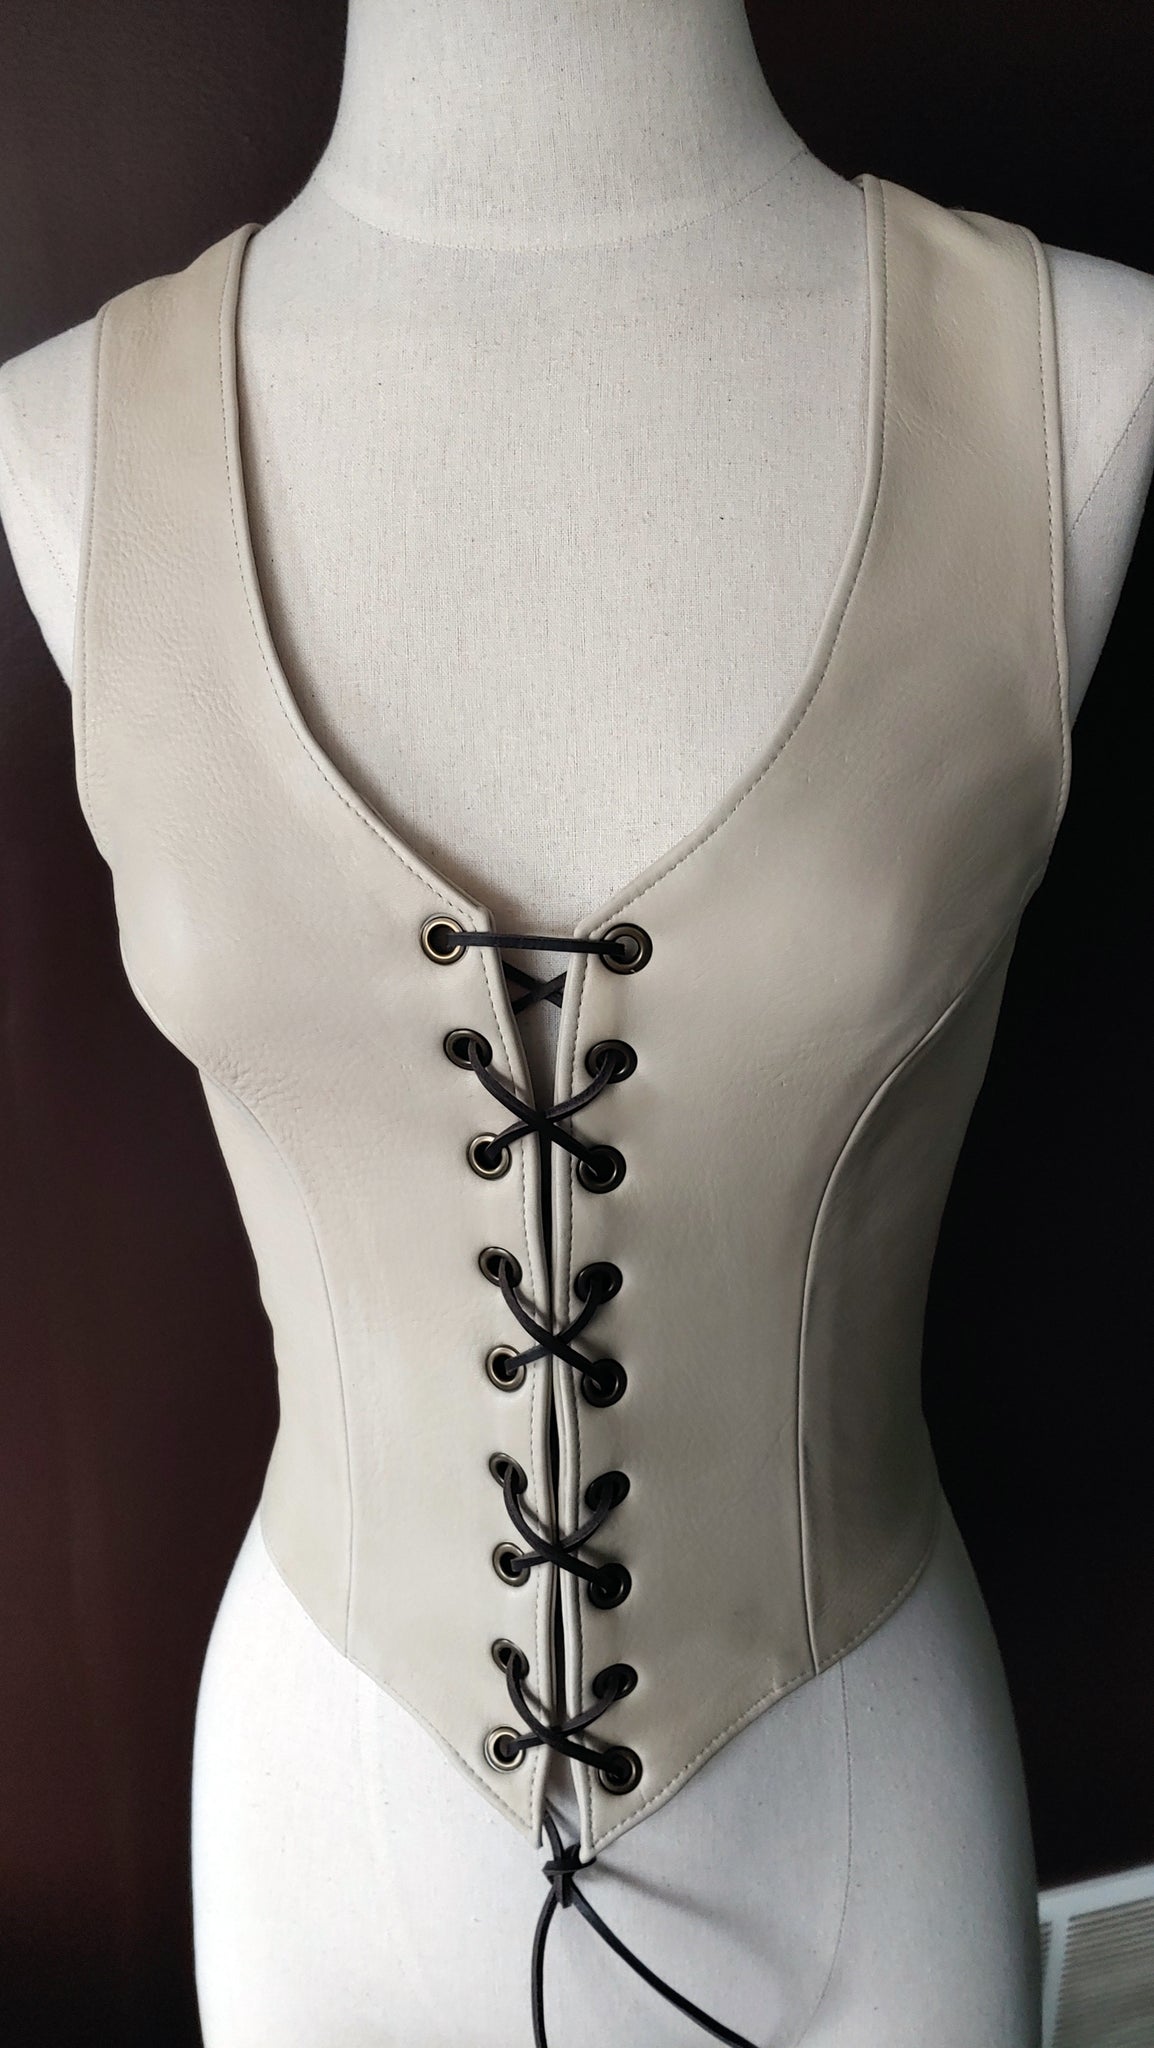 Leather Halter, Vest Style, Lace Up, Backless, DEERSKIN Leather